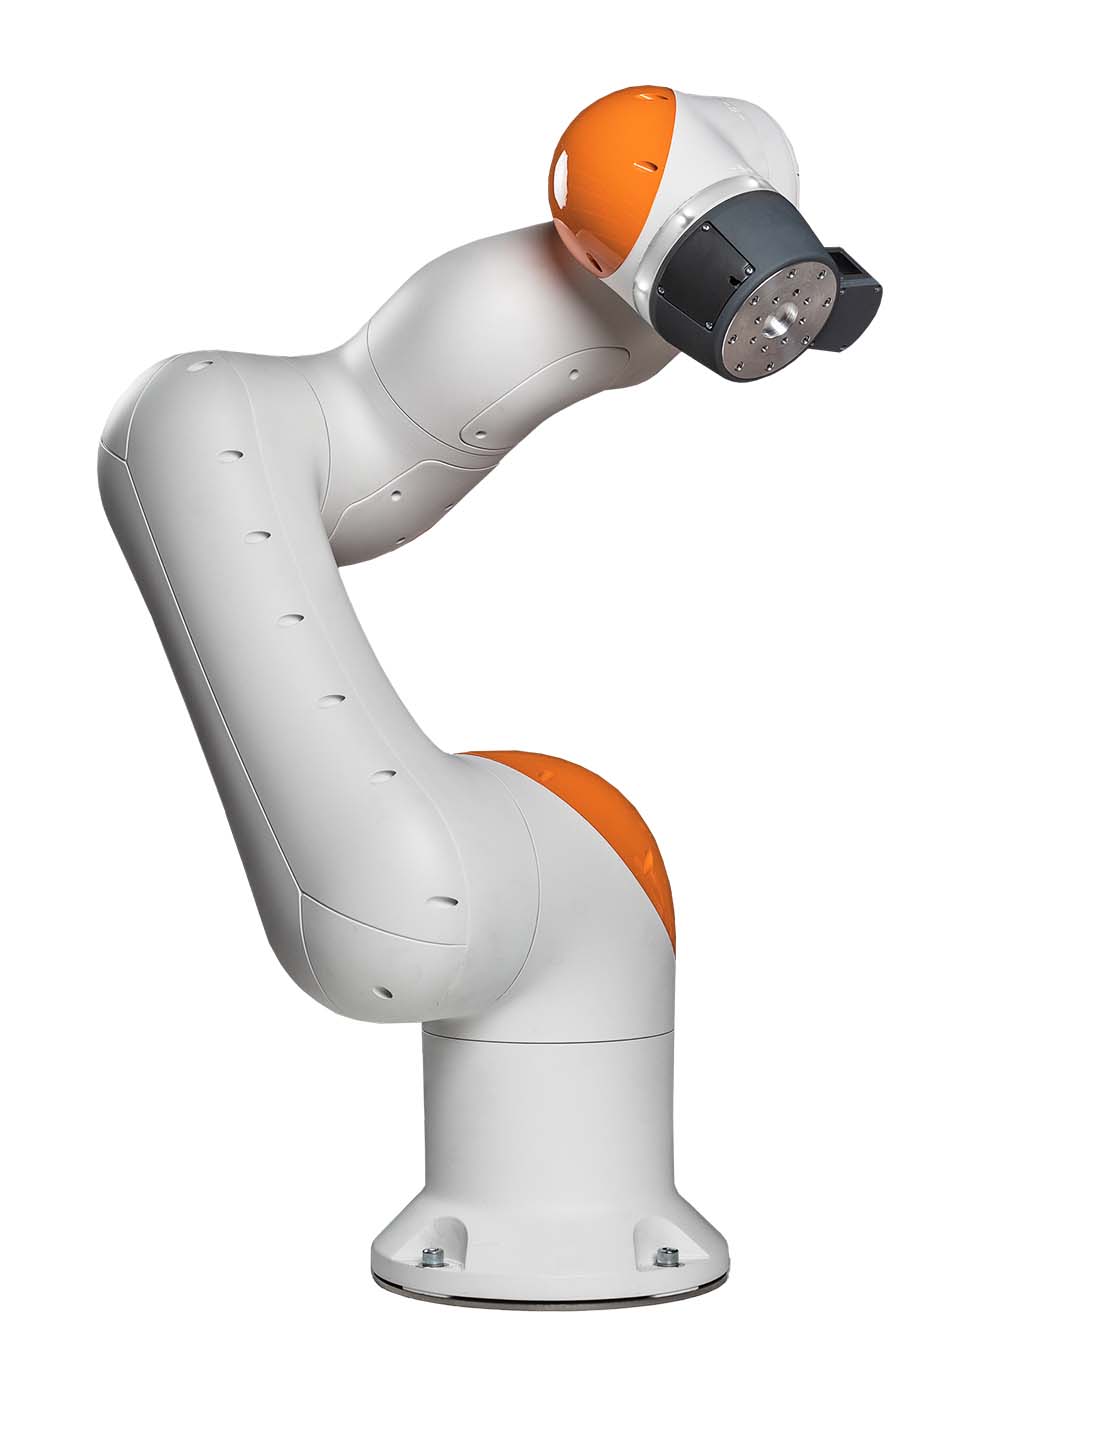 With a Kuka LBR iisy 15 cobot and an adhesive application system from Robatech, two-dimensional and three-dimensional adhesive application can be automated. 